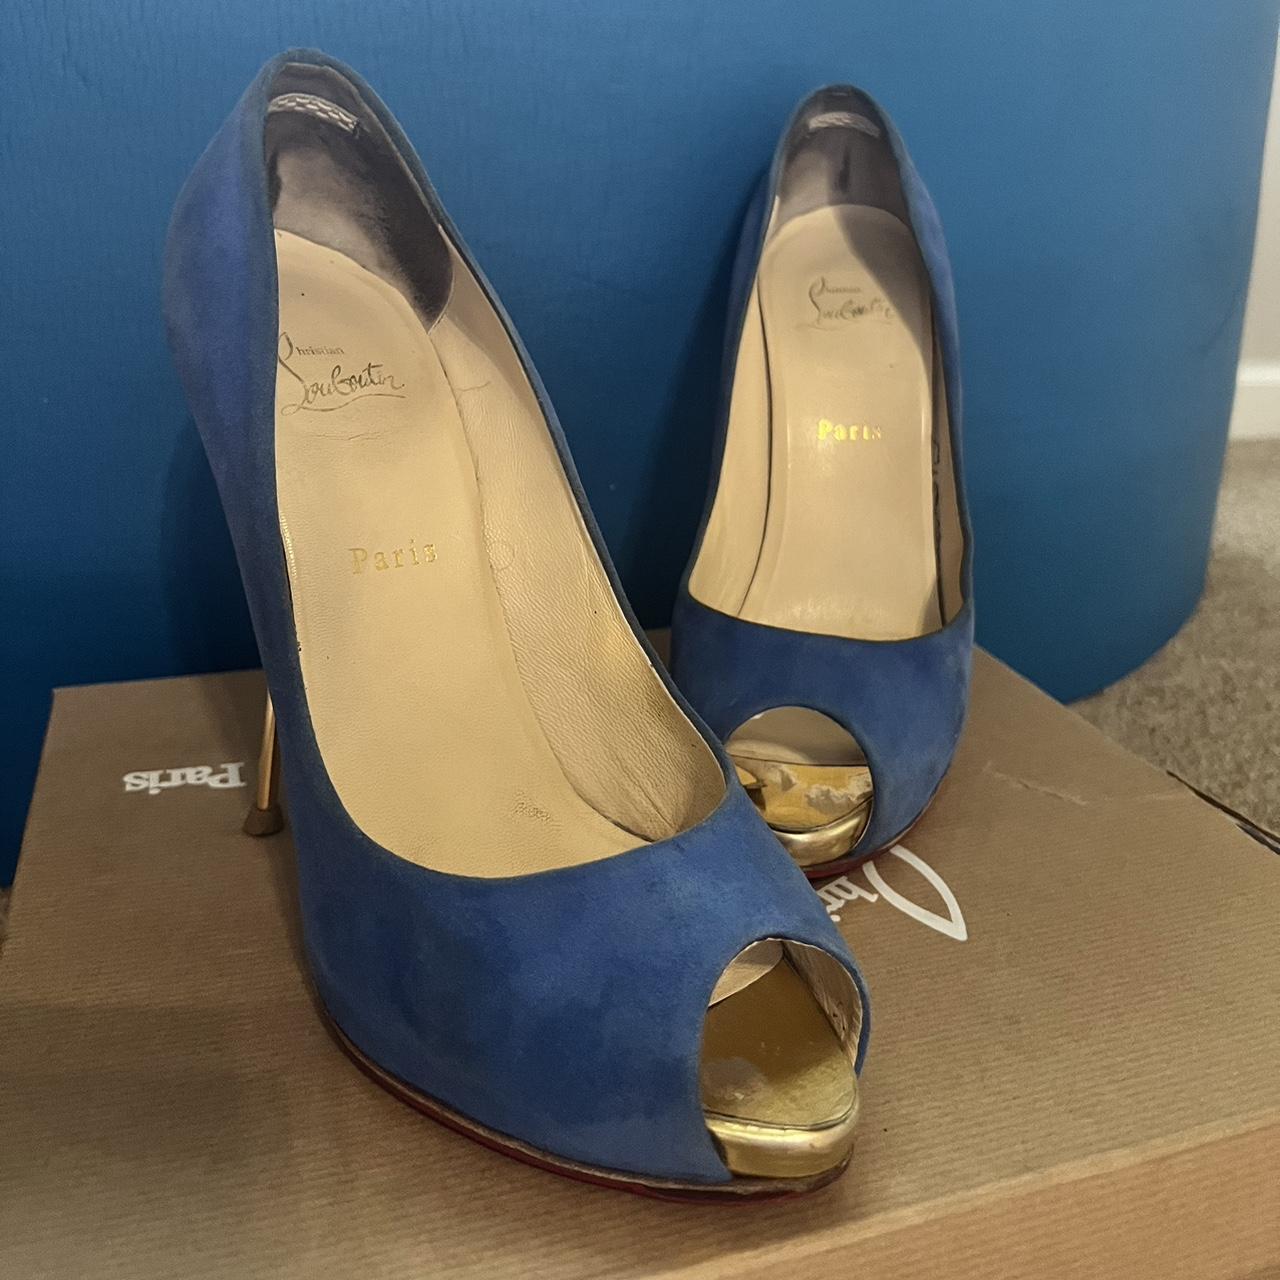 Christian Louboutin Sneaker Blue sued with spikes - Depop